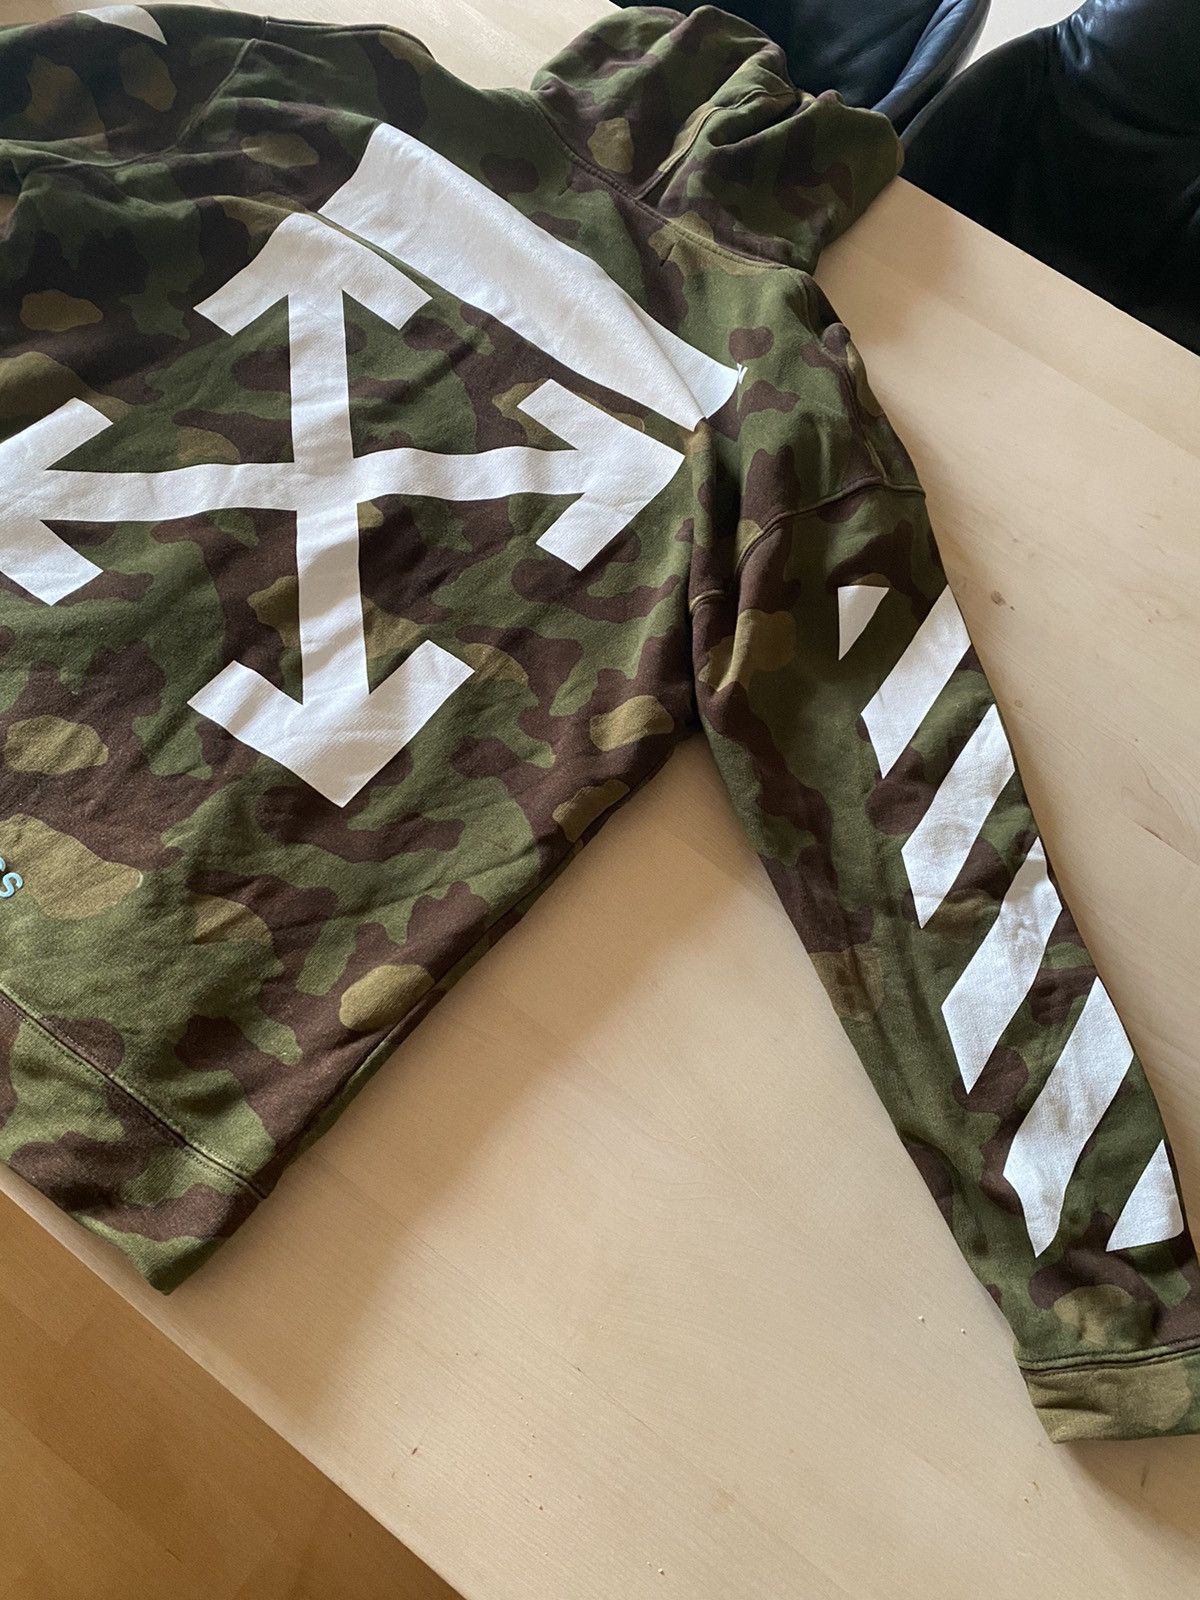 Off-White Off-White "Seeing Things" Camo | Grailed